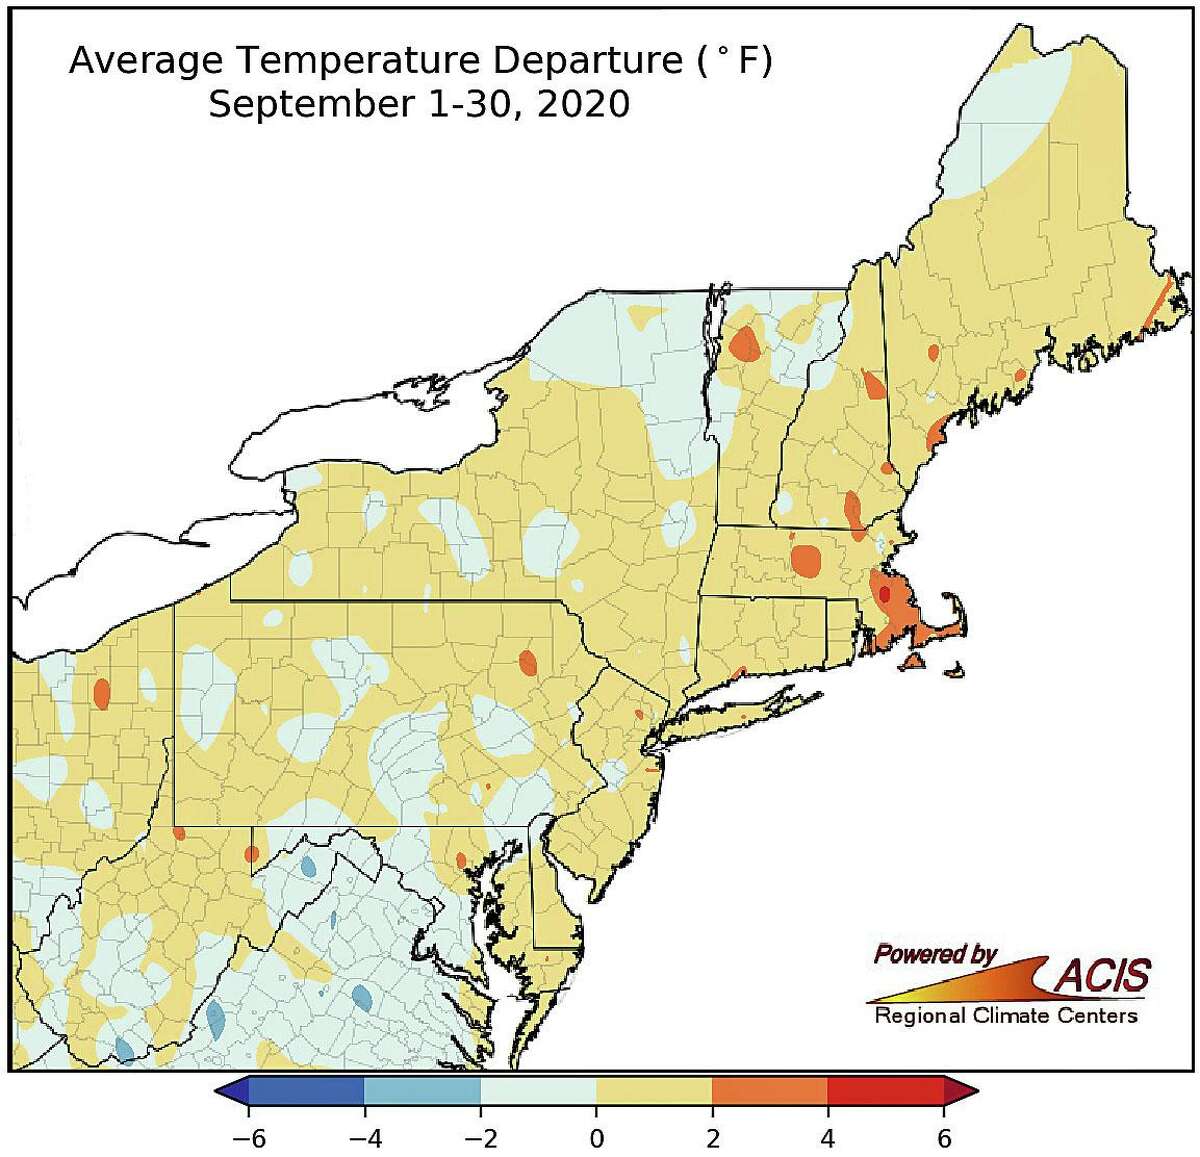 September temperatures were within 2 degrees of normal for most of the Northeast.